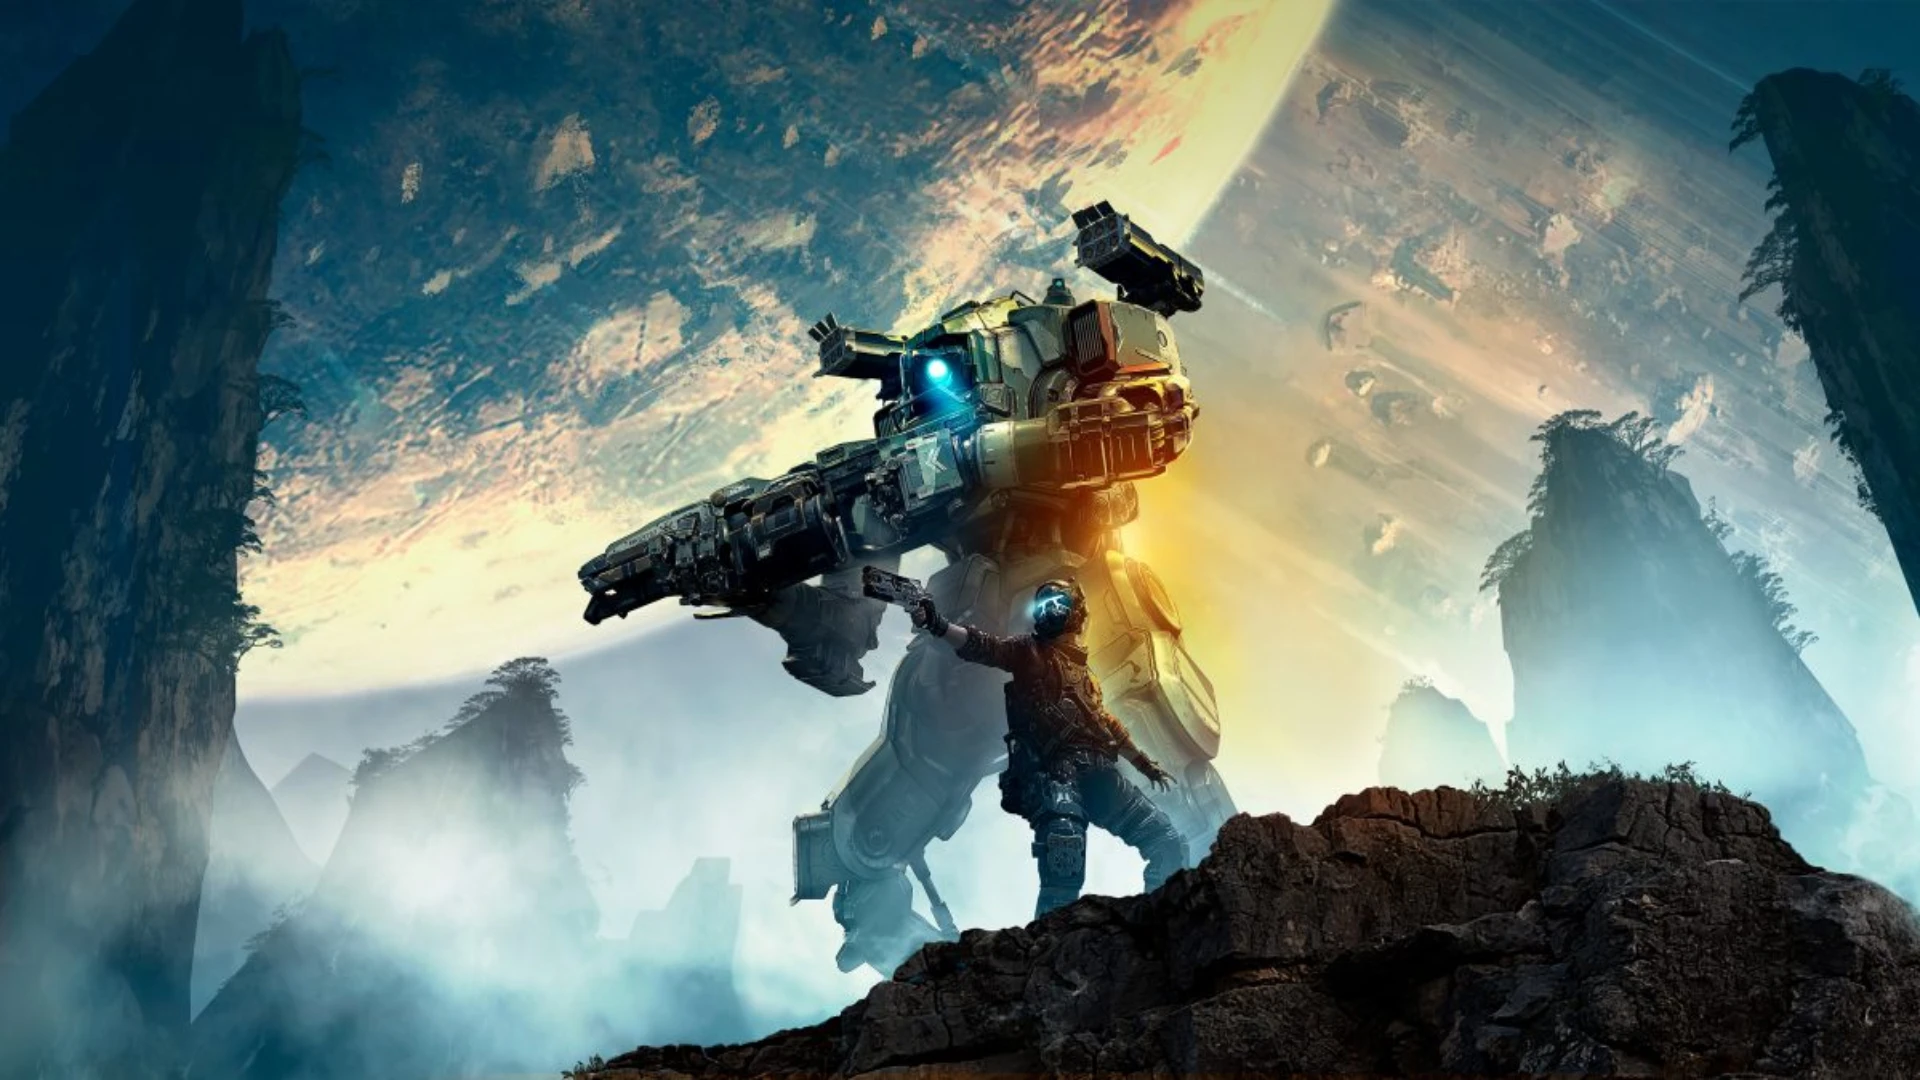 Looks Like A New Titanfall Game Is In The Works